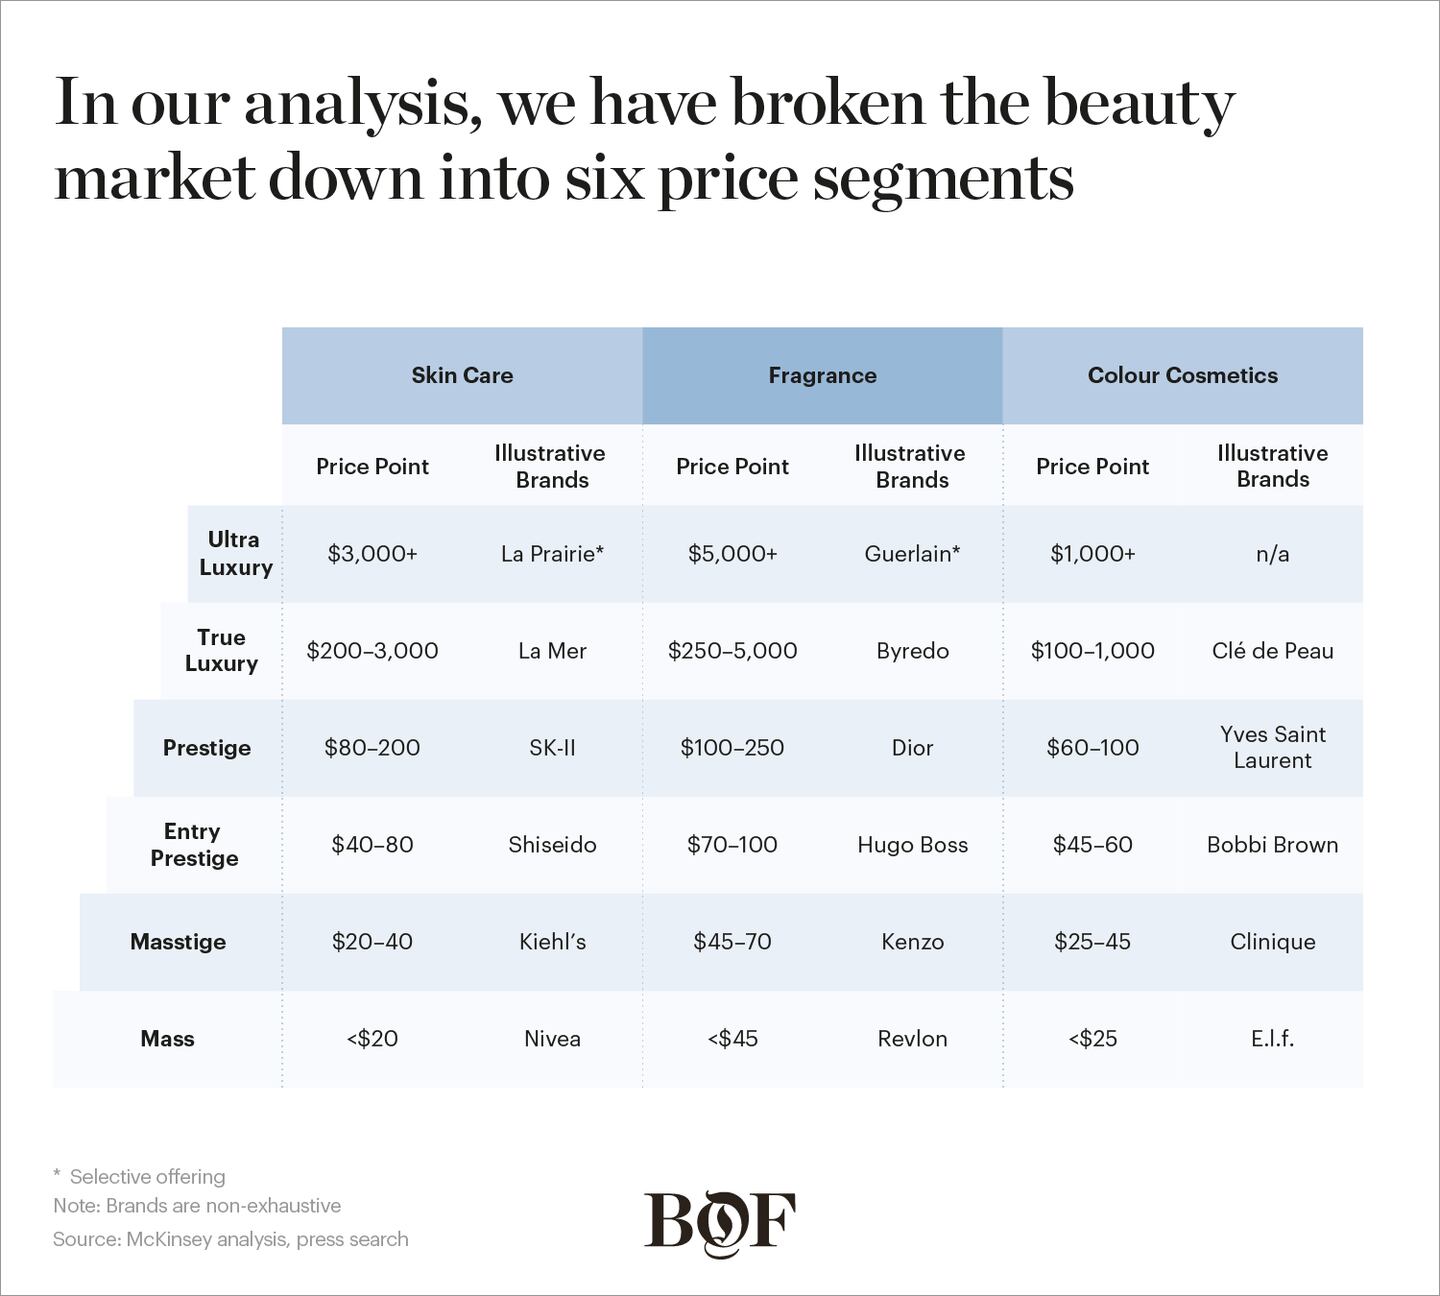 In our analysis, we have broken the beauty market
down into six price segments.